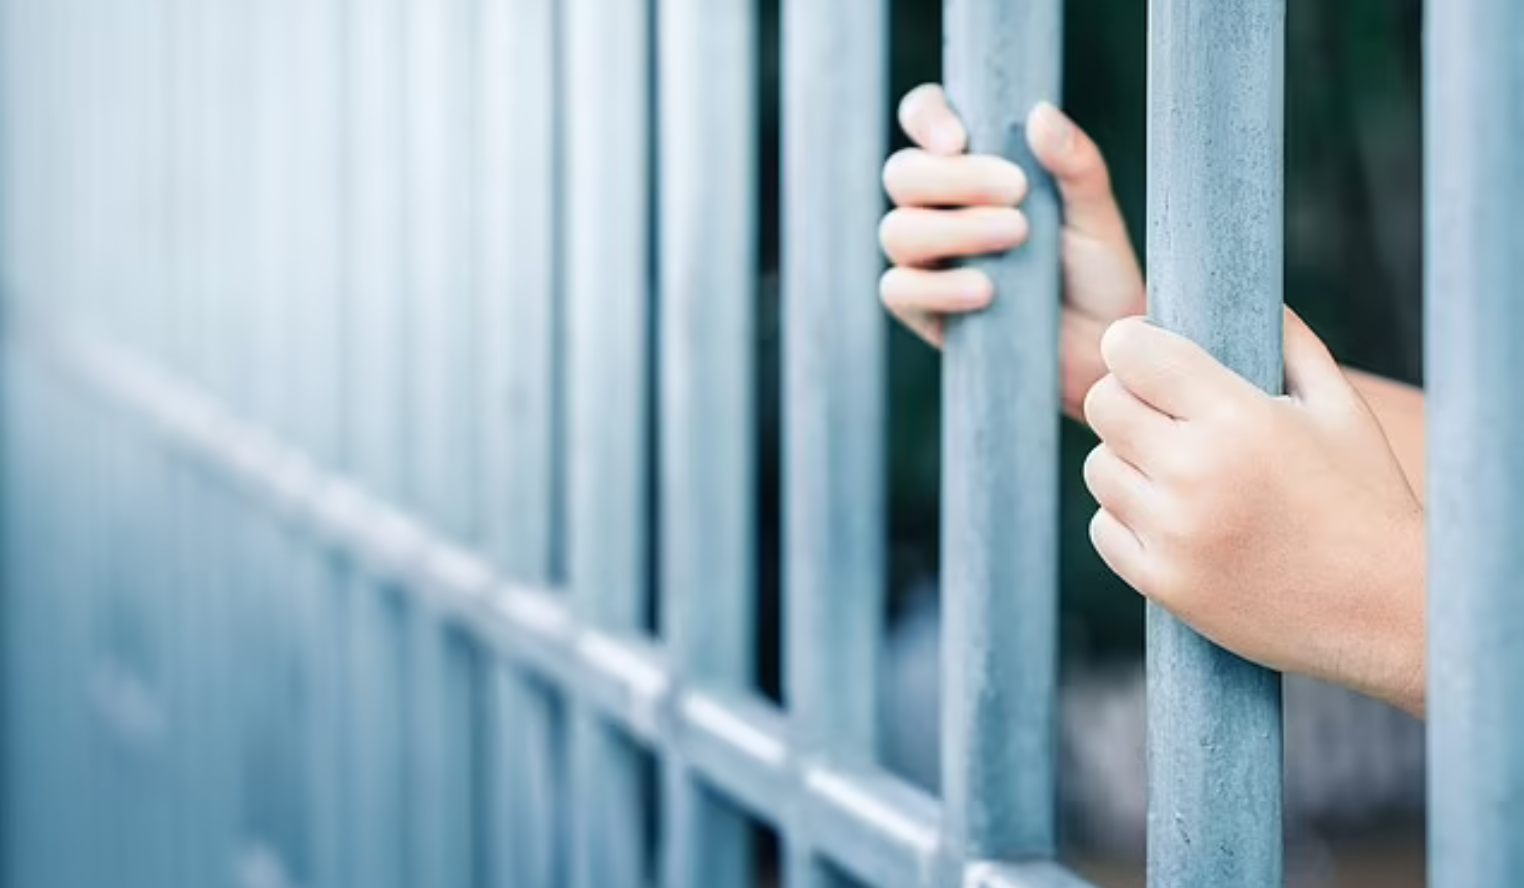 A group of 17 boys in Western Australia have been moved from youth detention to an adult prison with no timeline set for their return. Credit: Shutterstock/Nuttadol Kanperm